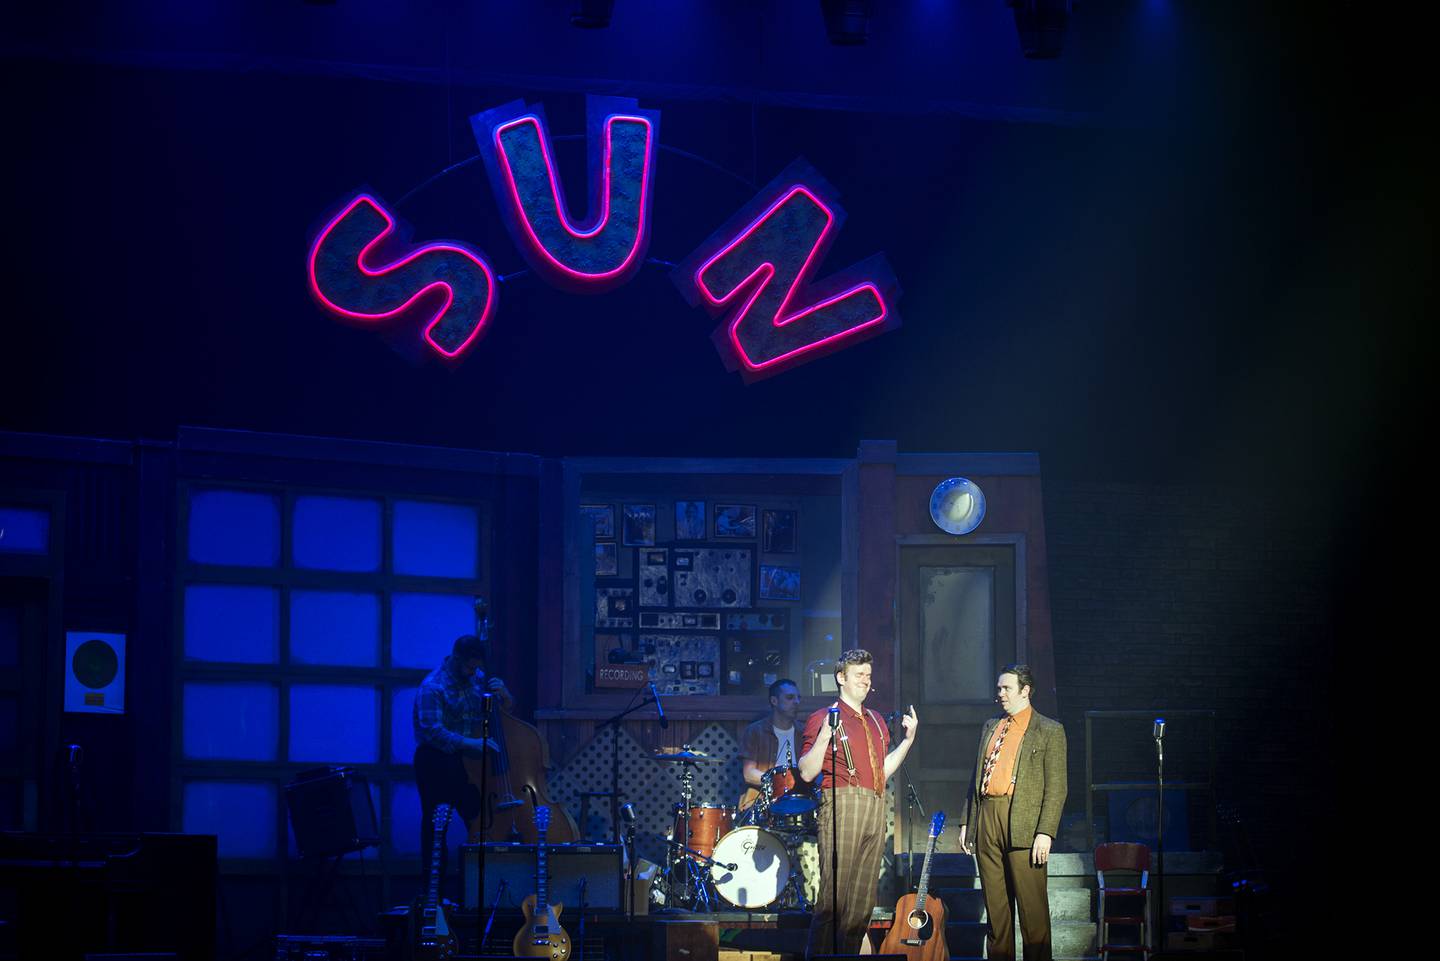 Lewis and Phillips act out a scene during the stage show “Million Dollar Quartet.”